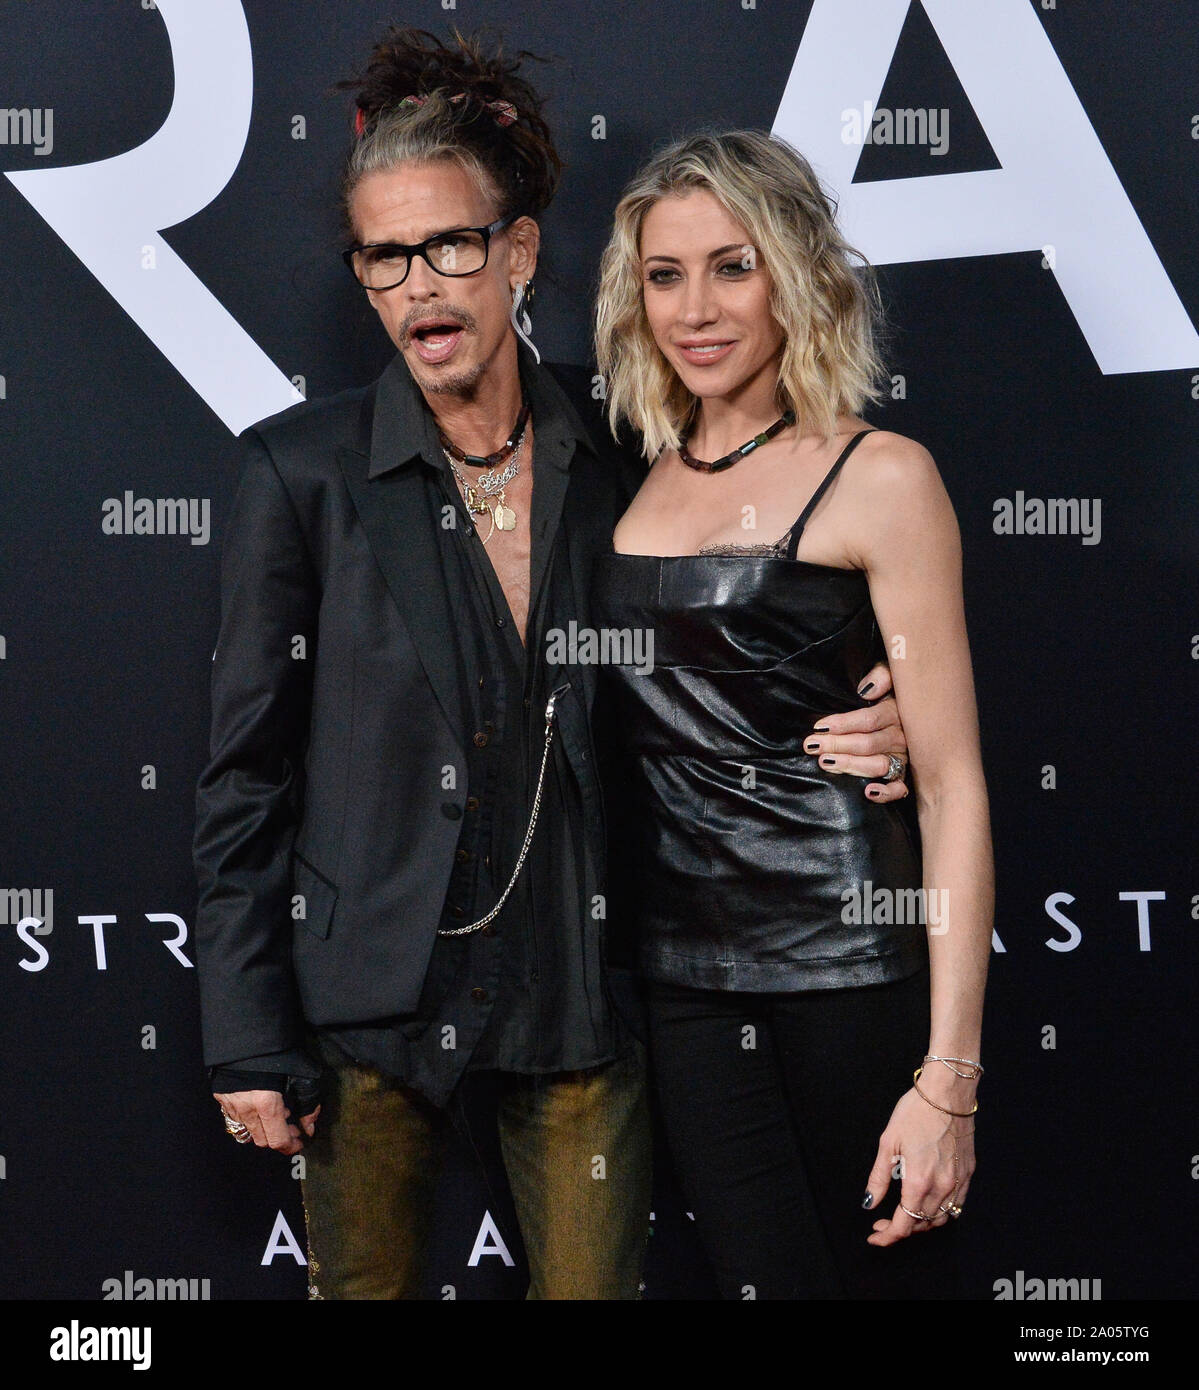 Aerosmith lead singer Steven Tyler and his girlfriend Aimee Preston attend the premiere of the motion picture sci-fi thriller 'Ad Astra' at the ArcLight Cinerama Dome in the Hollywood section of Los Angeles on Wednesday, September 18, 2019. Storyline: Astronaut Roy McBride (Brad Pitt) travels to the outer edges of the solar system to find his missing father and unravel a mystery that threatens the survival of our planet. His journey will uncover secrets that challenge the nature of human existence and our place in the cosmos.  Photo by Jim Ruymen/UPI Stock Photo